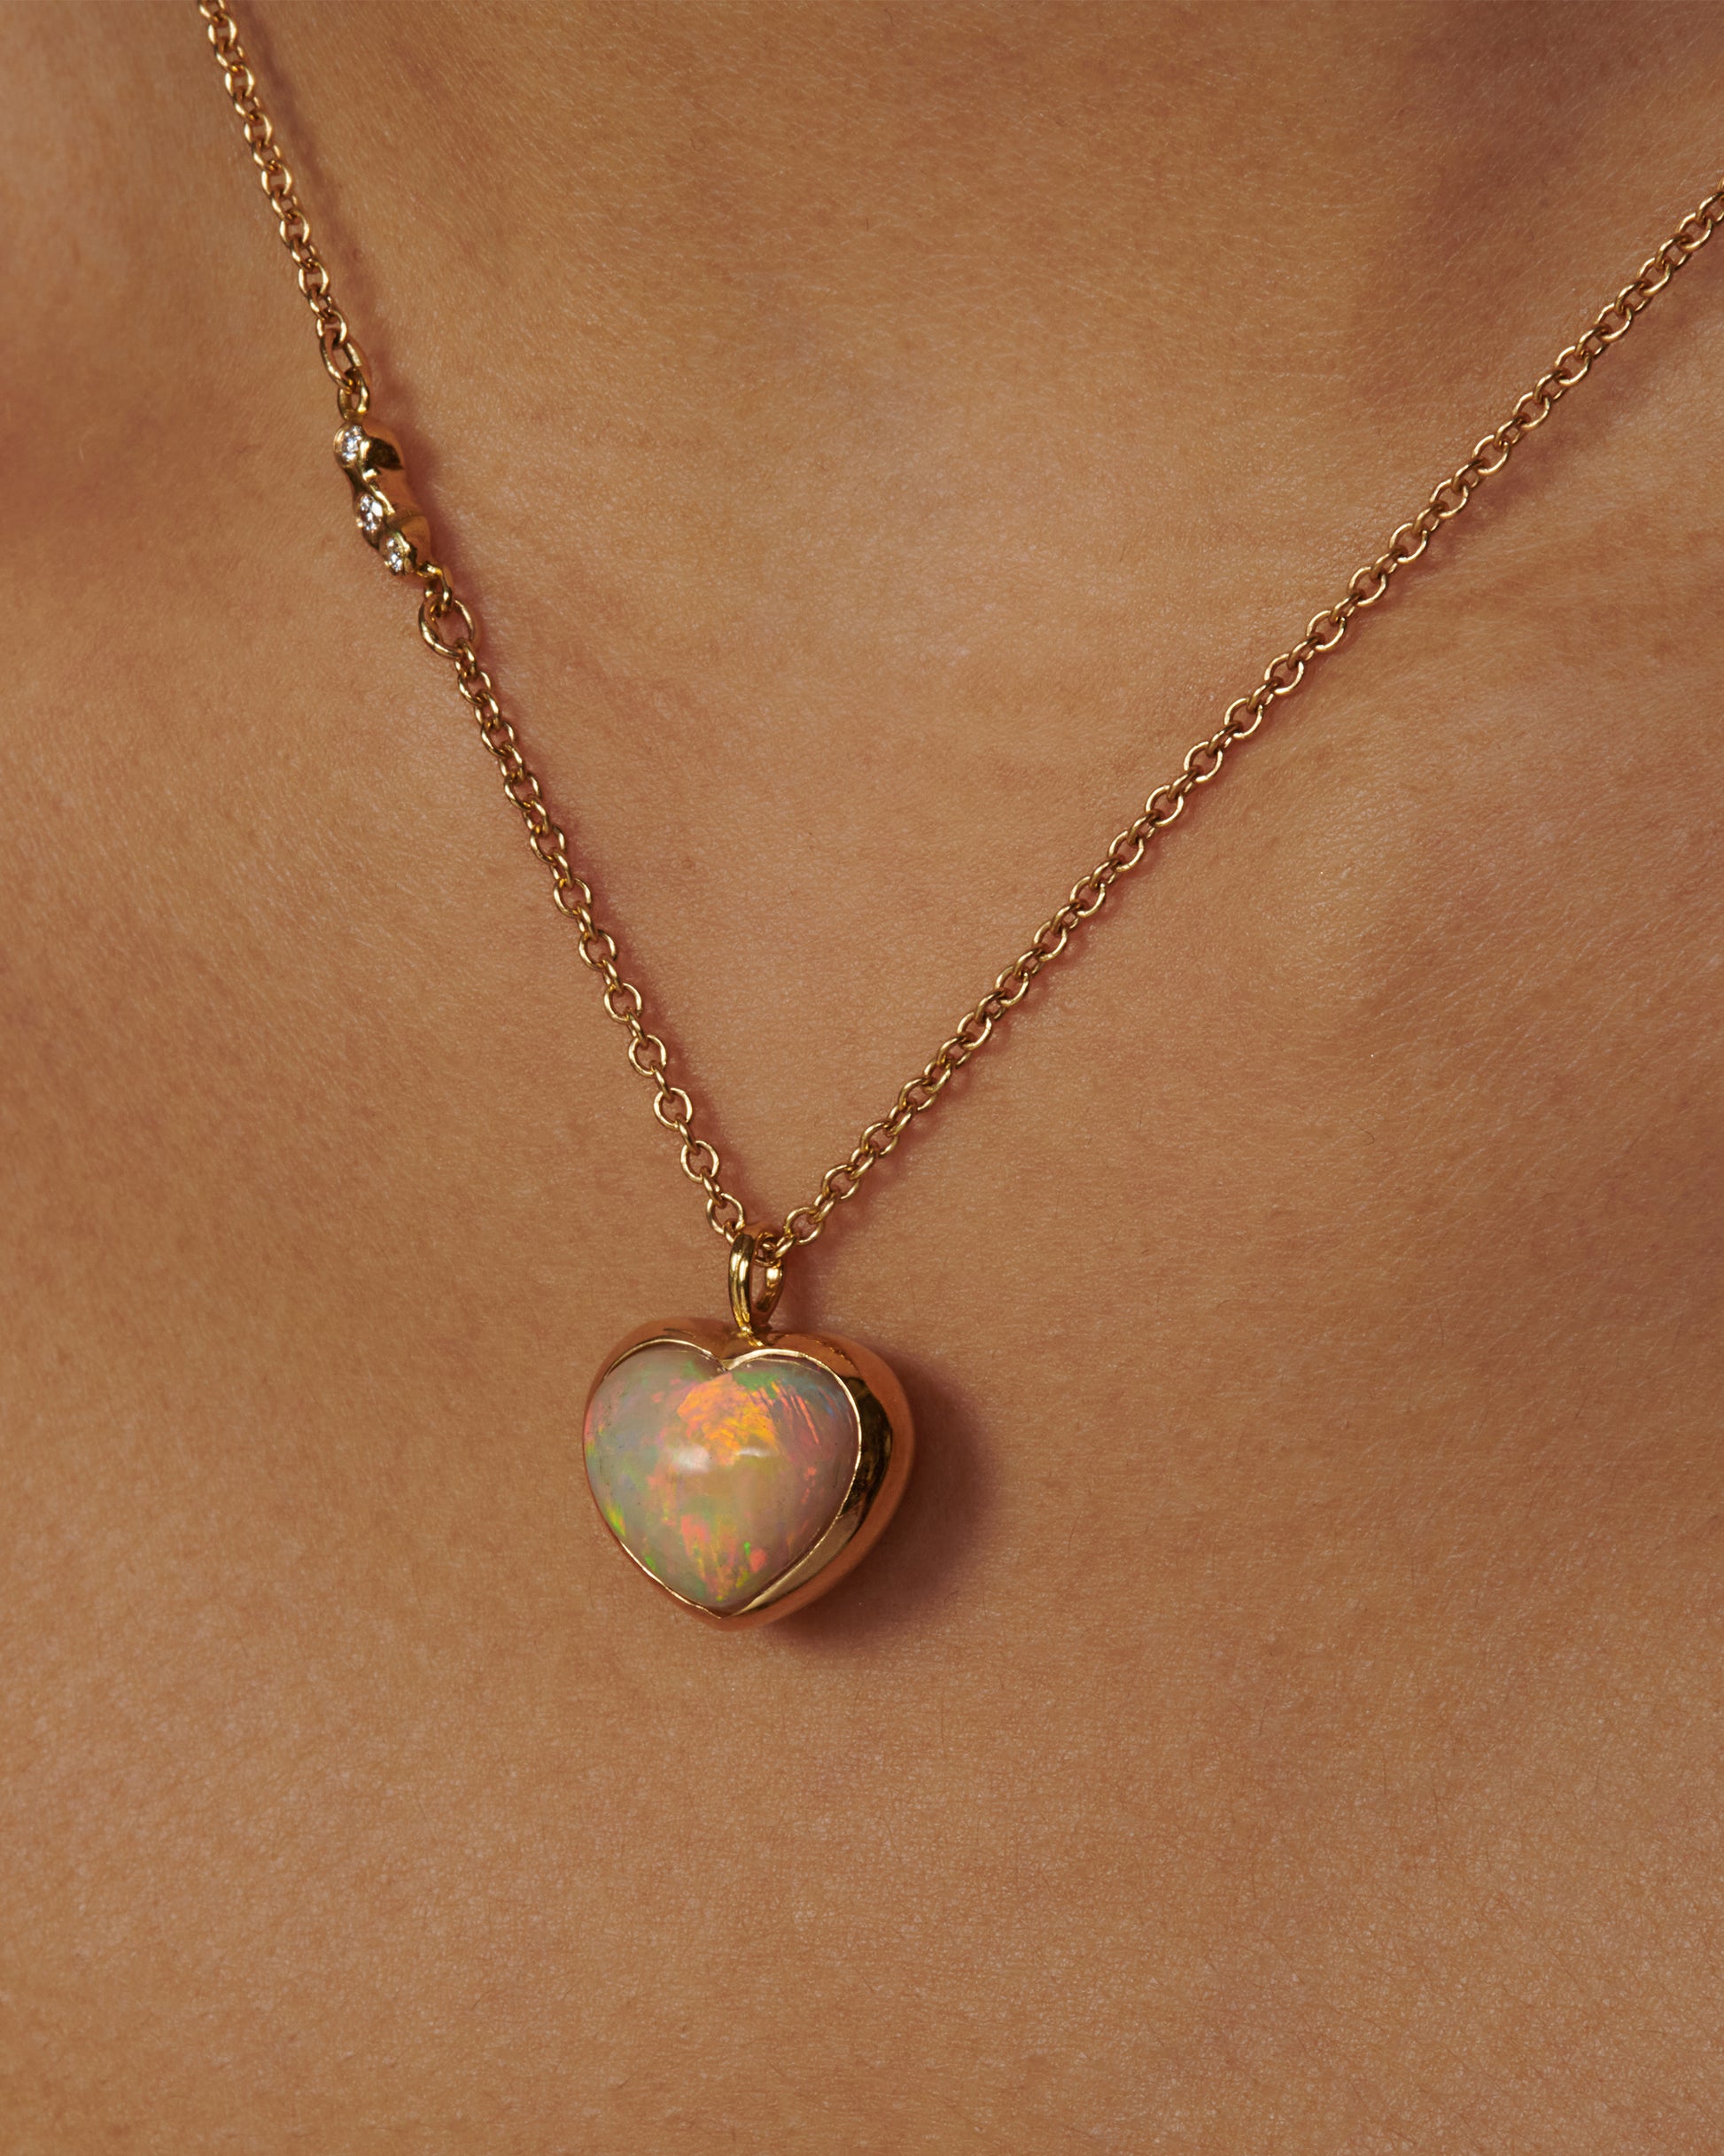 A glorious, bubble-like, Australian opal heart pendant whose fire can be seen from every angle.